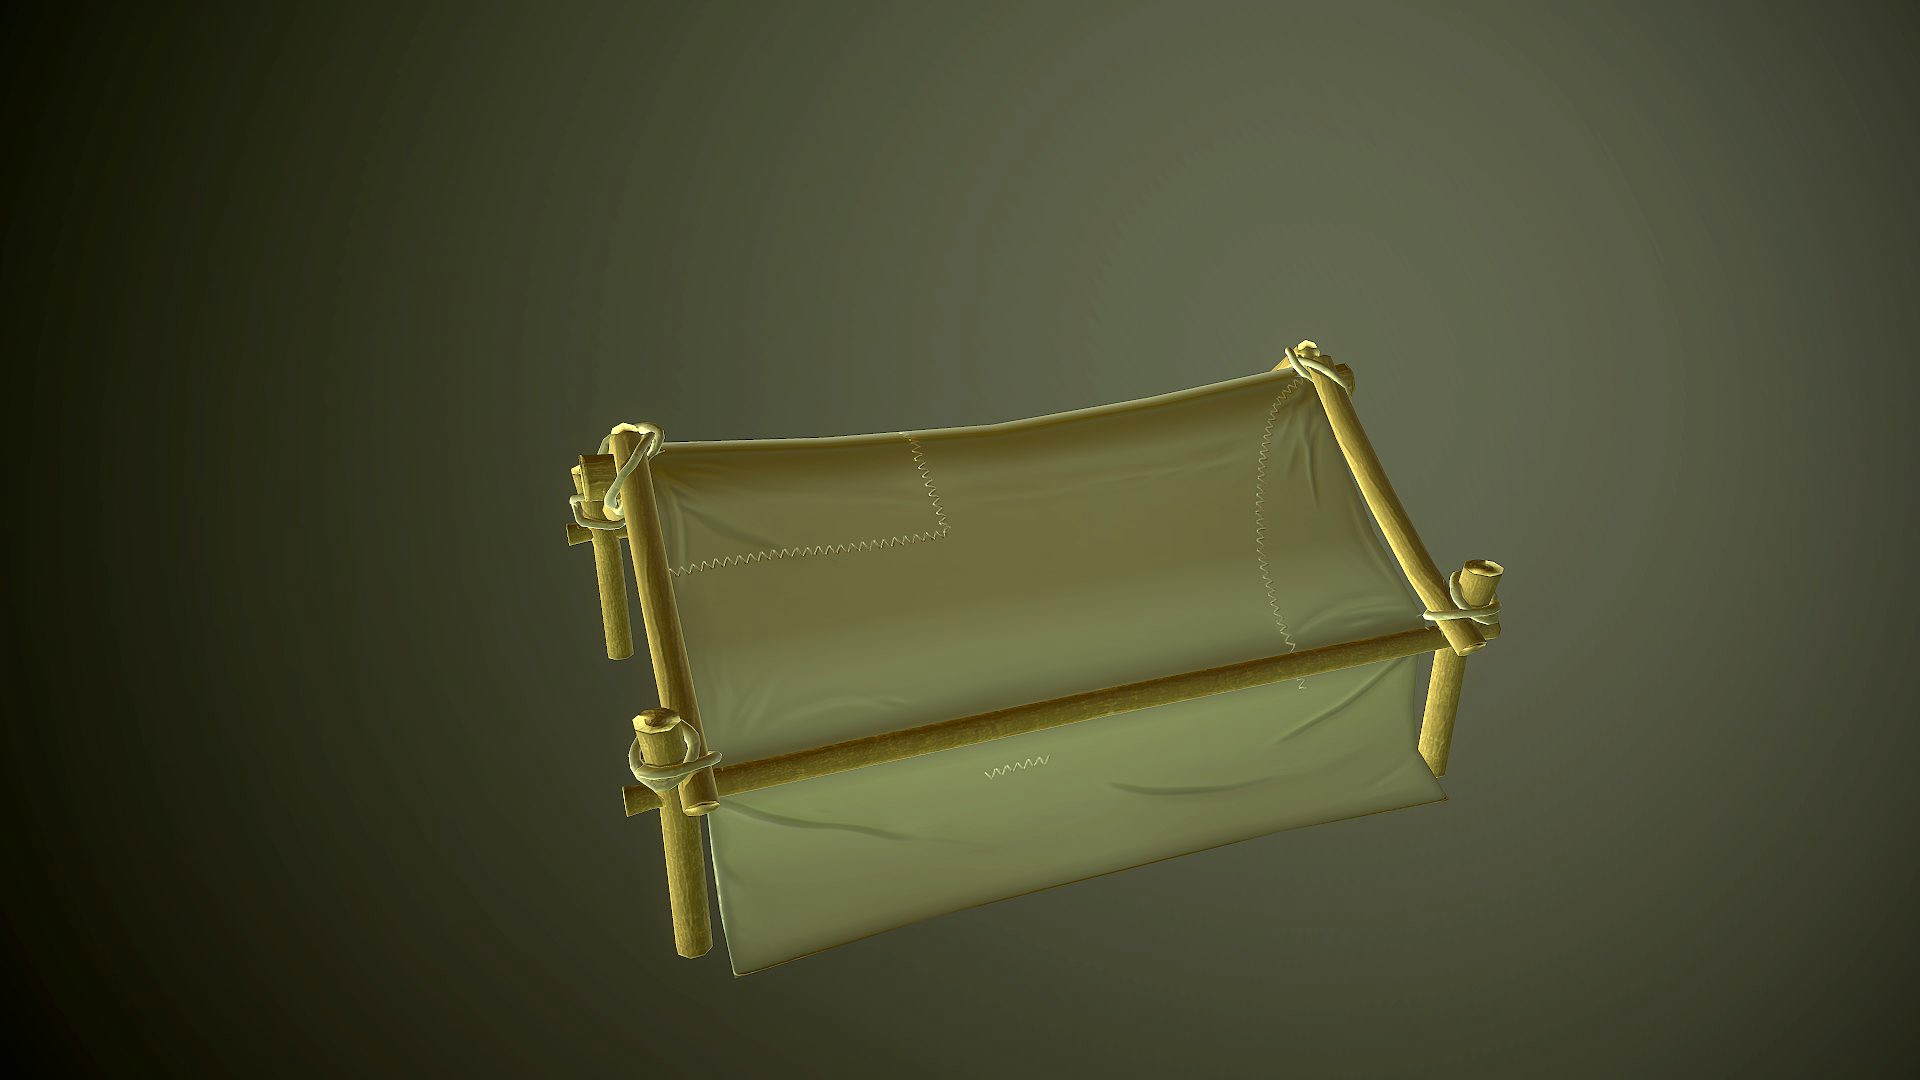 Lowpoly tent model with 4 different texture maps. Maps are 2k and 4k for Arnold and Unity.